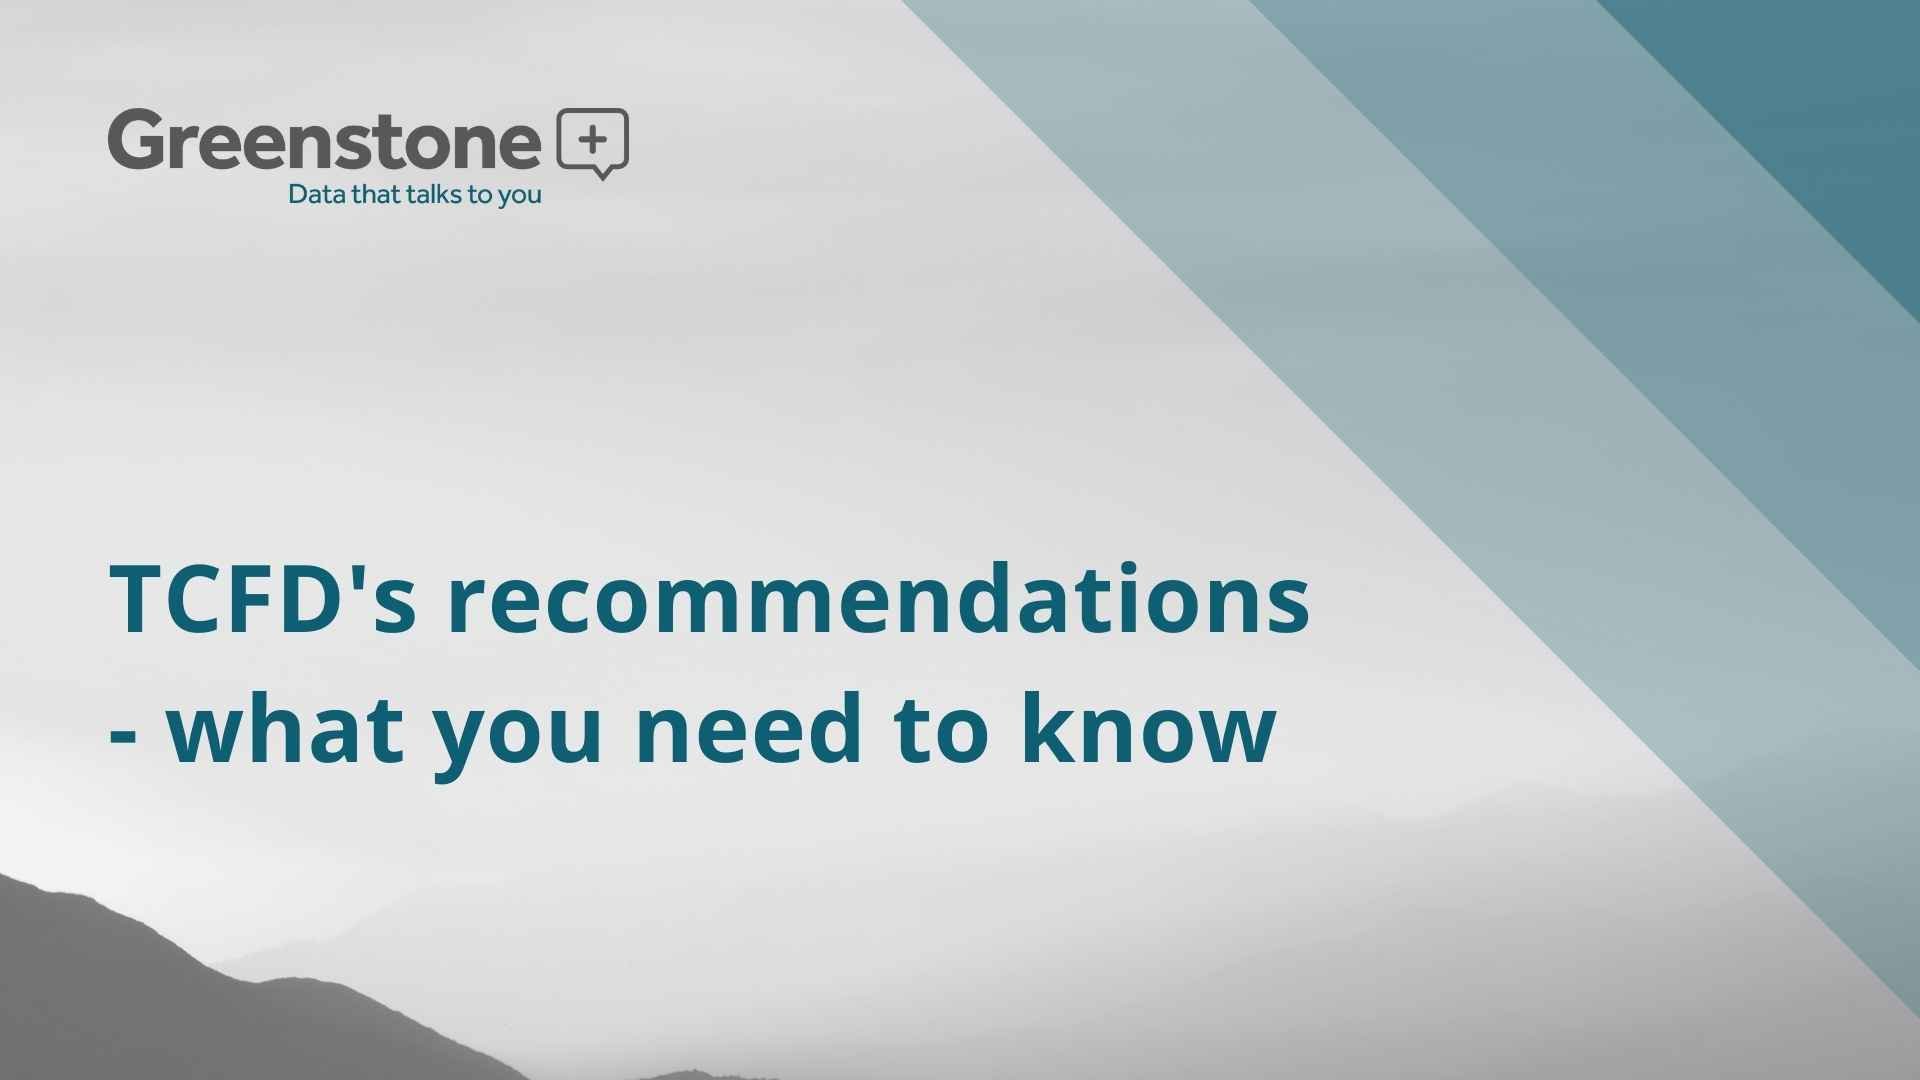 TCFD's recommendations - what you need to know